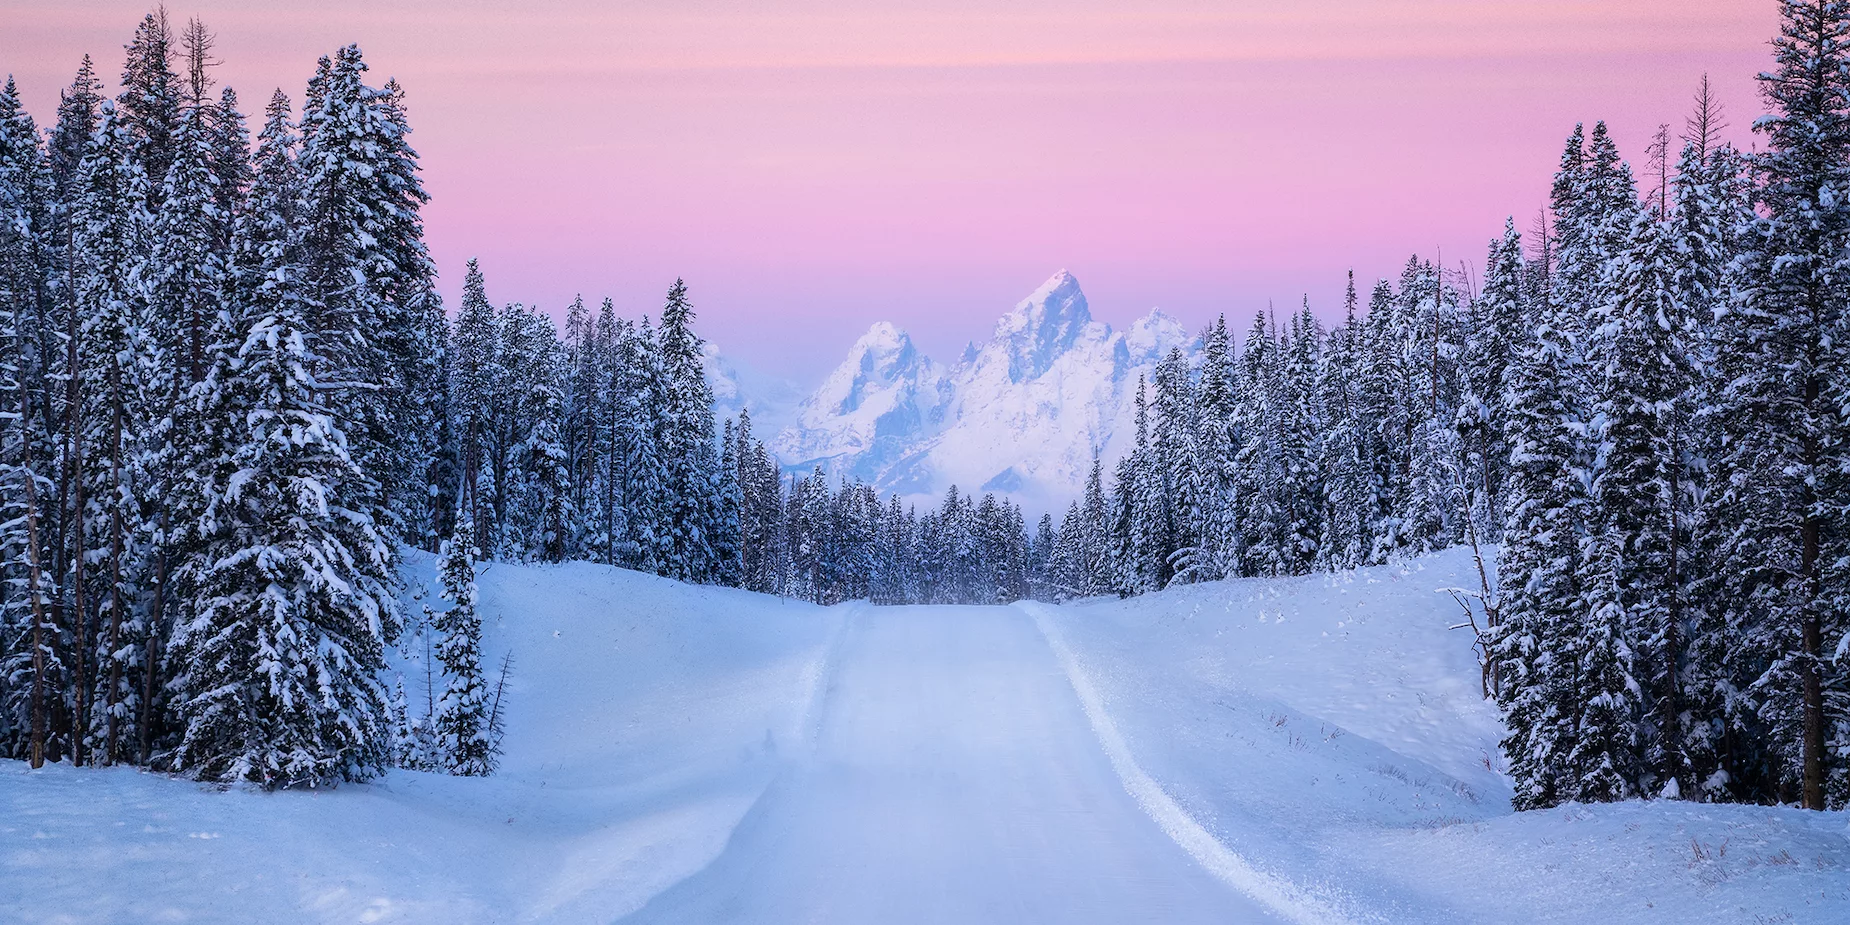 View of Tetons from Snow-Covered Road in Winter